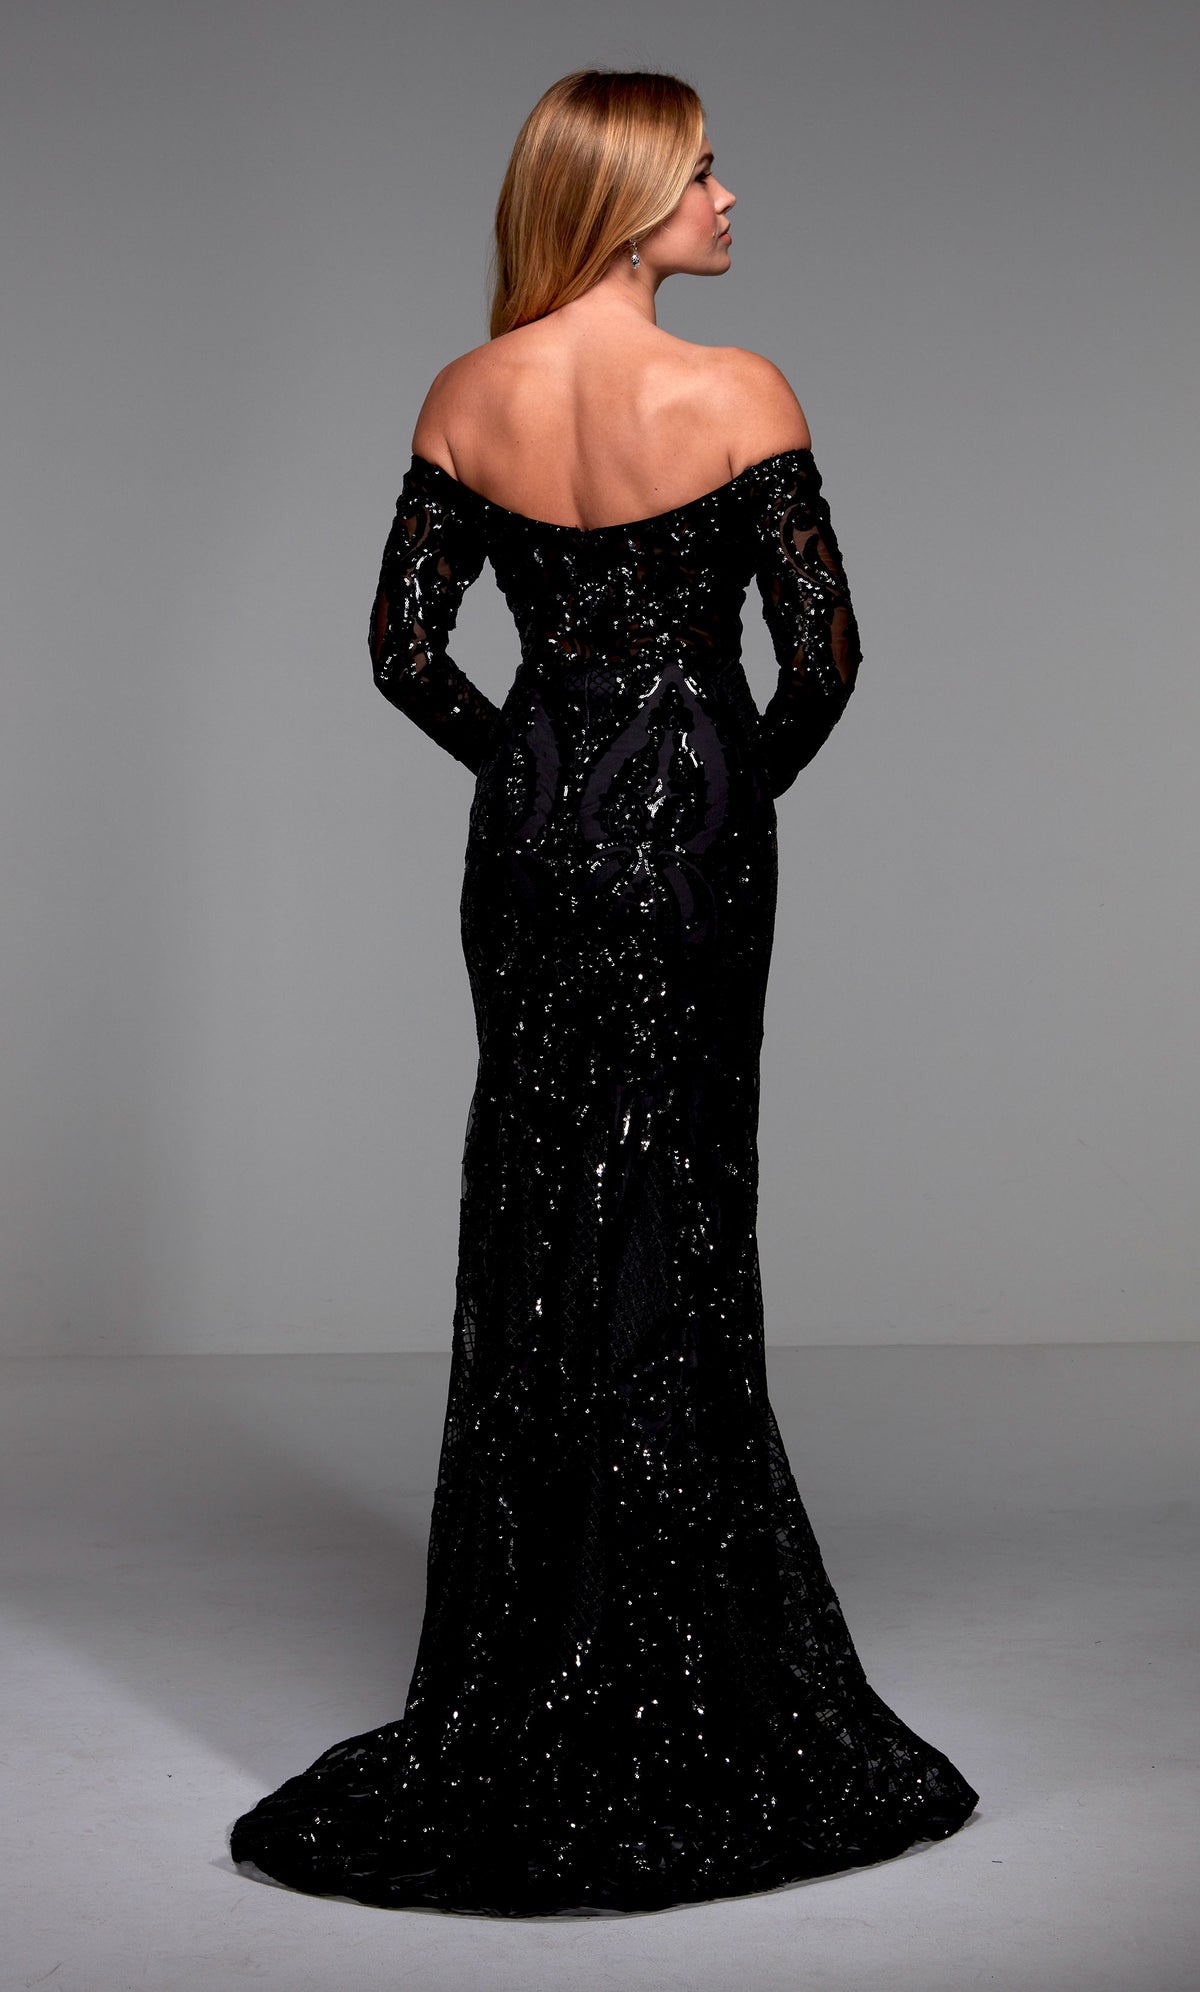 Sexy black, off the shoulder evening gown with long sleeves, sequin embellishment, and a train.